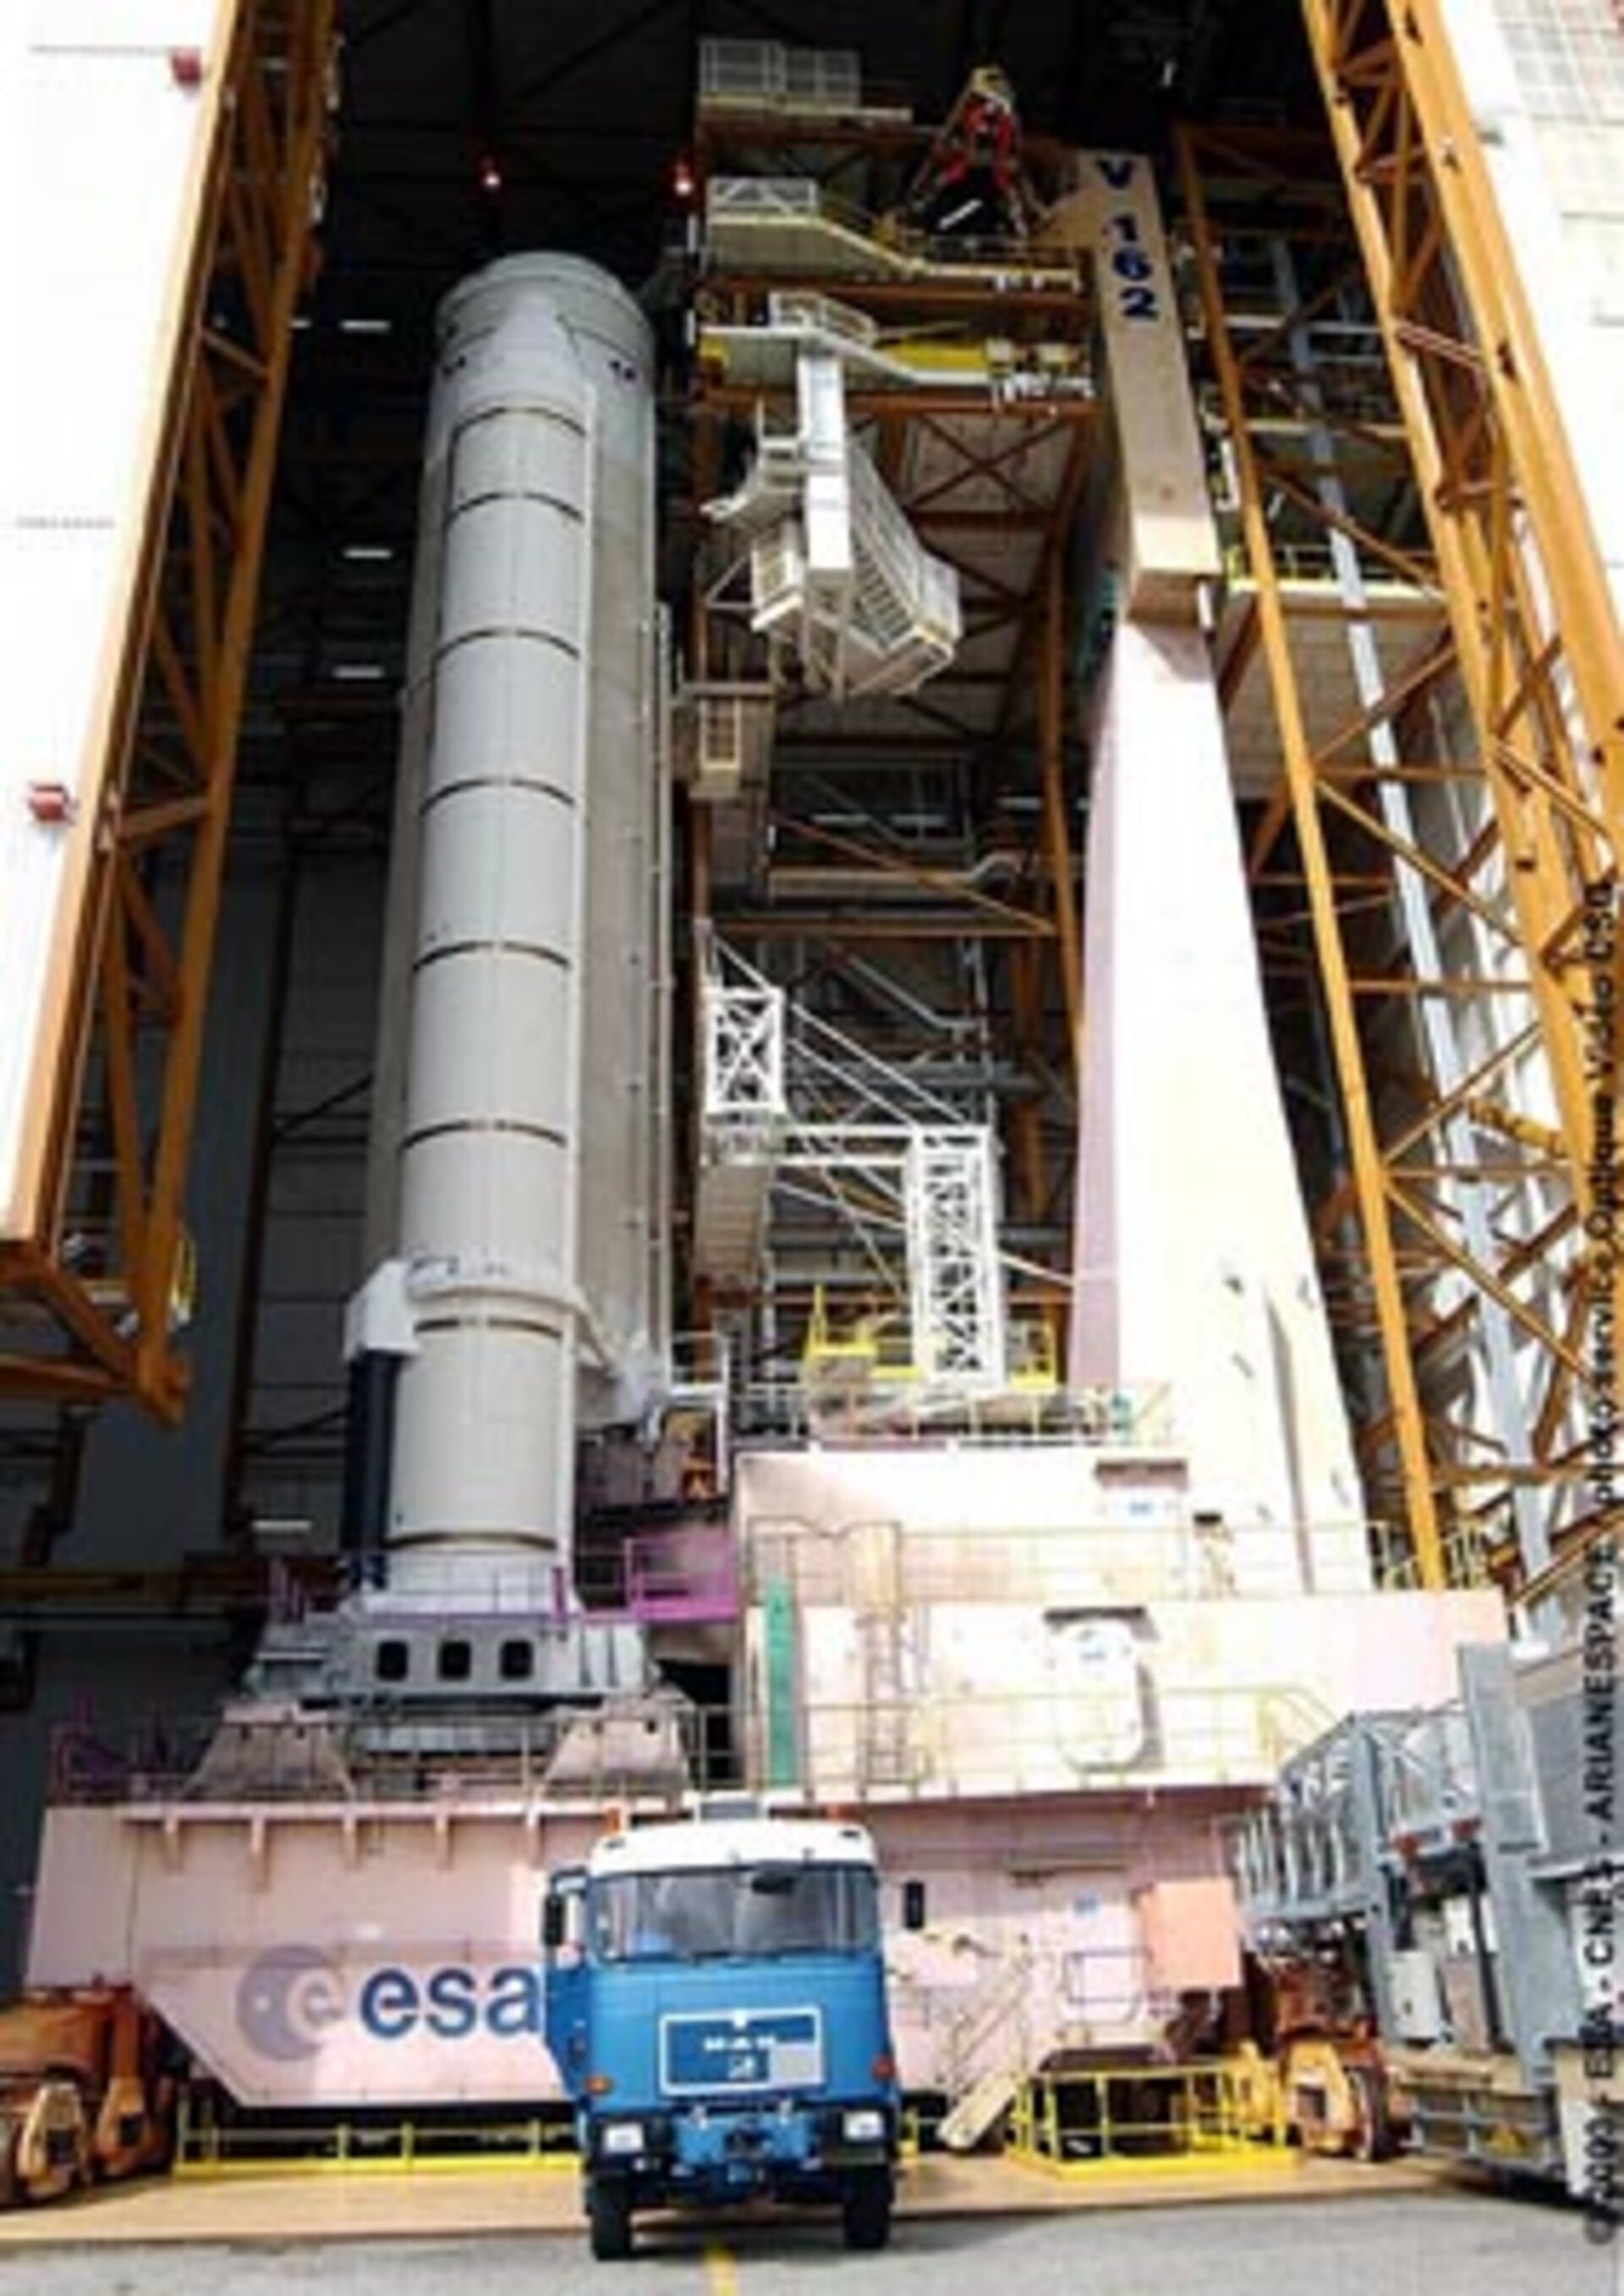 The Ariane 5 for Arianespace's upcoming Flight 162 was transferred to the final assembly building today